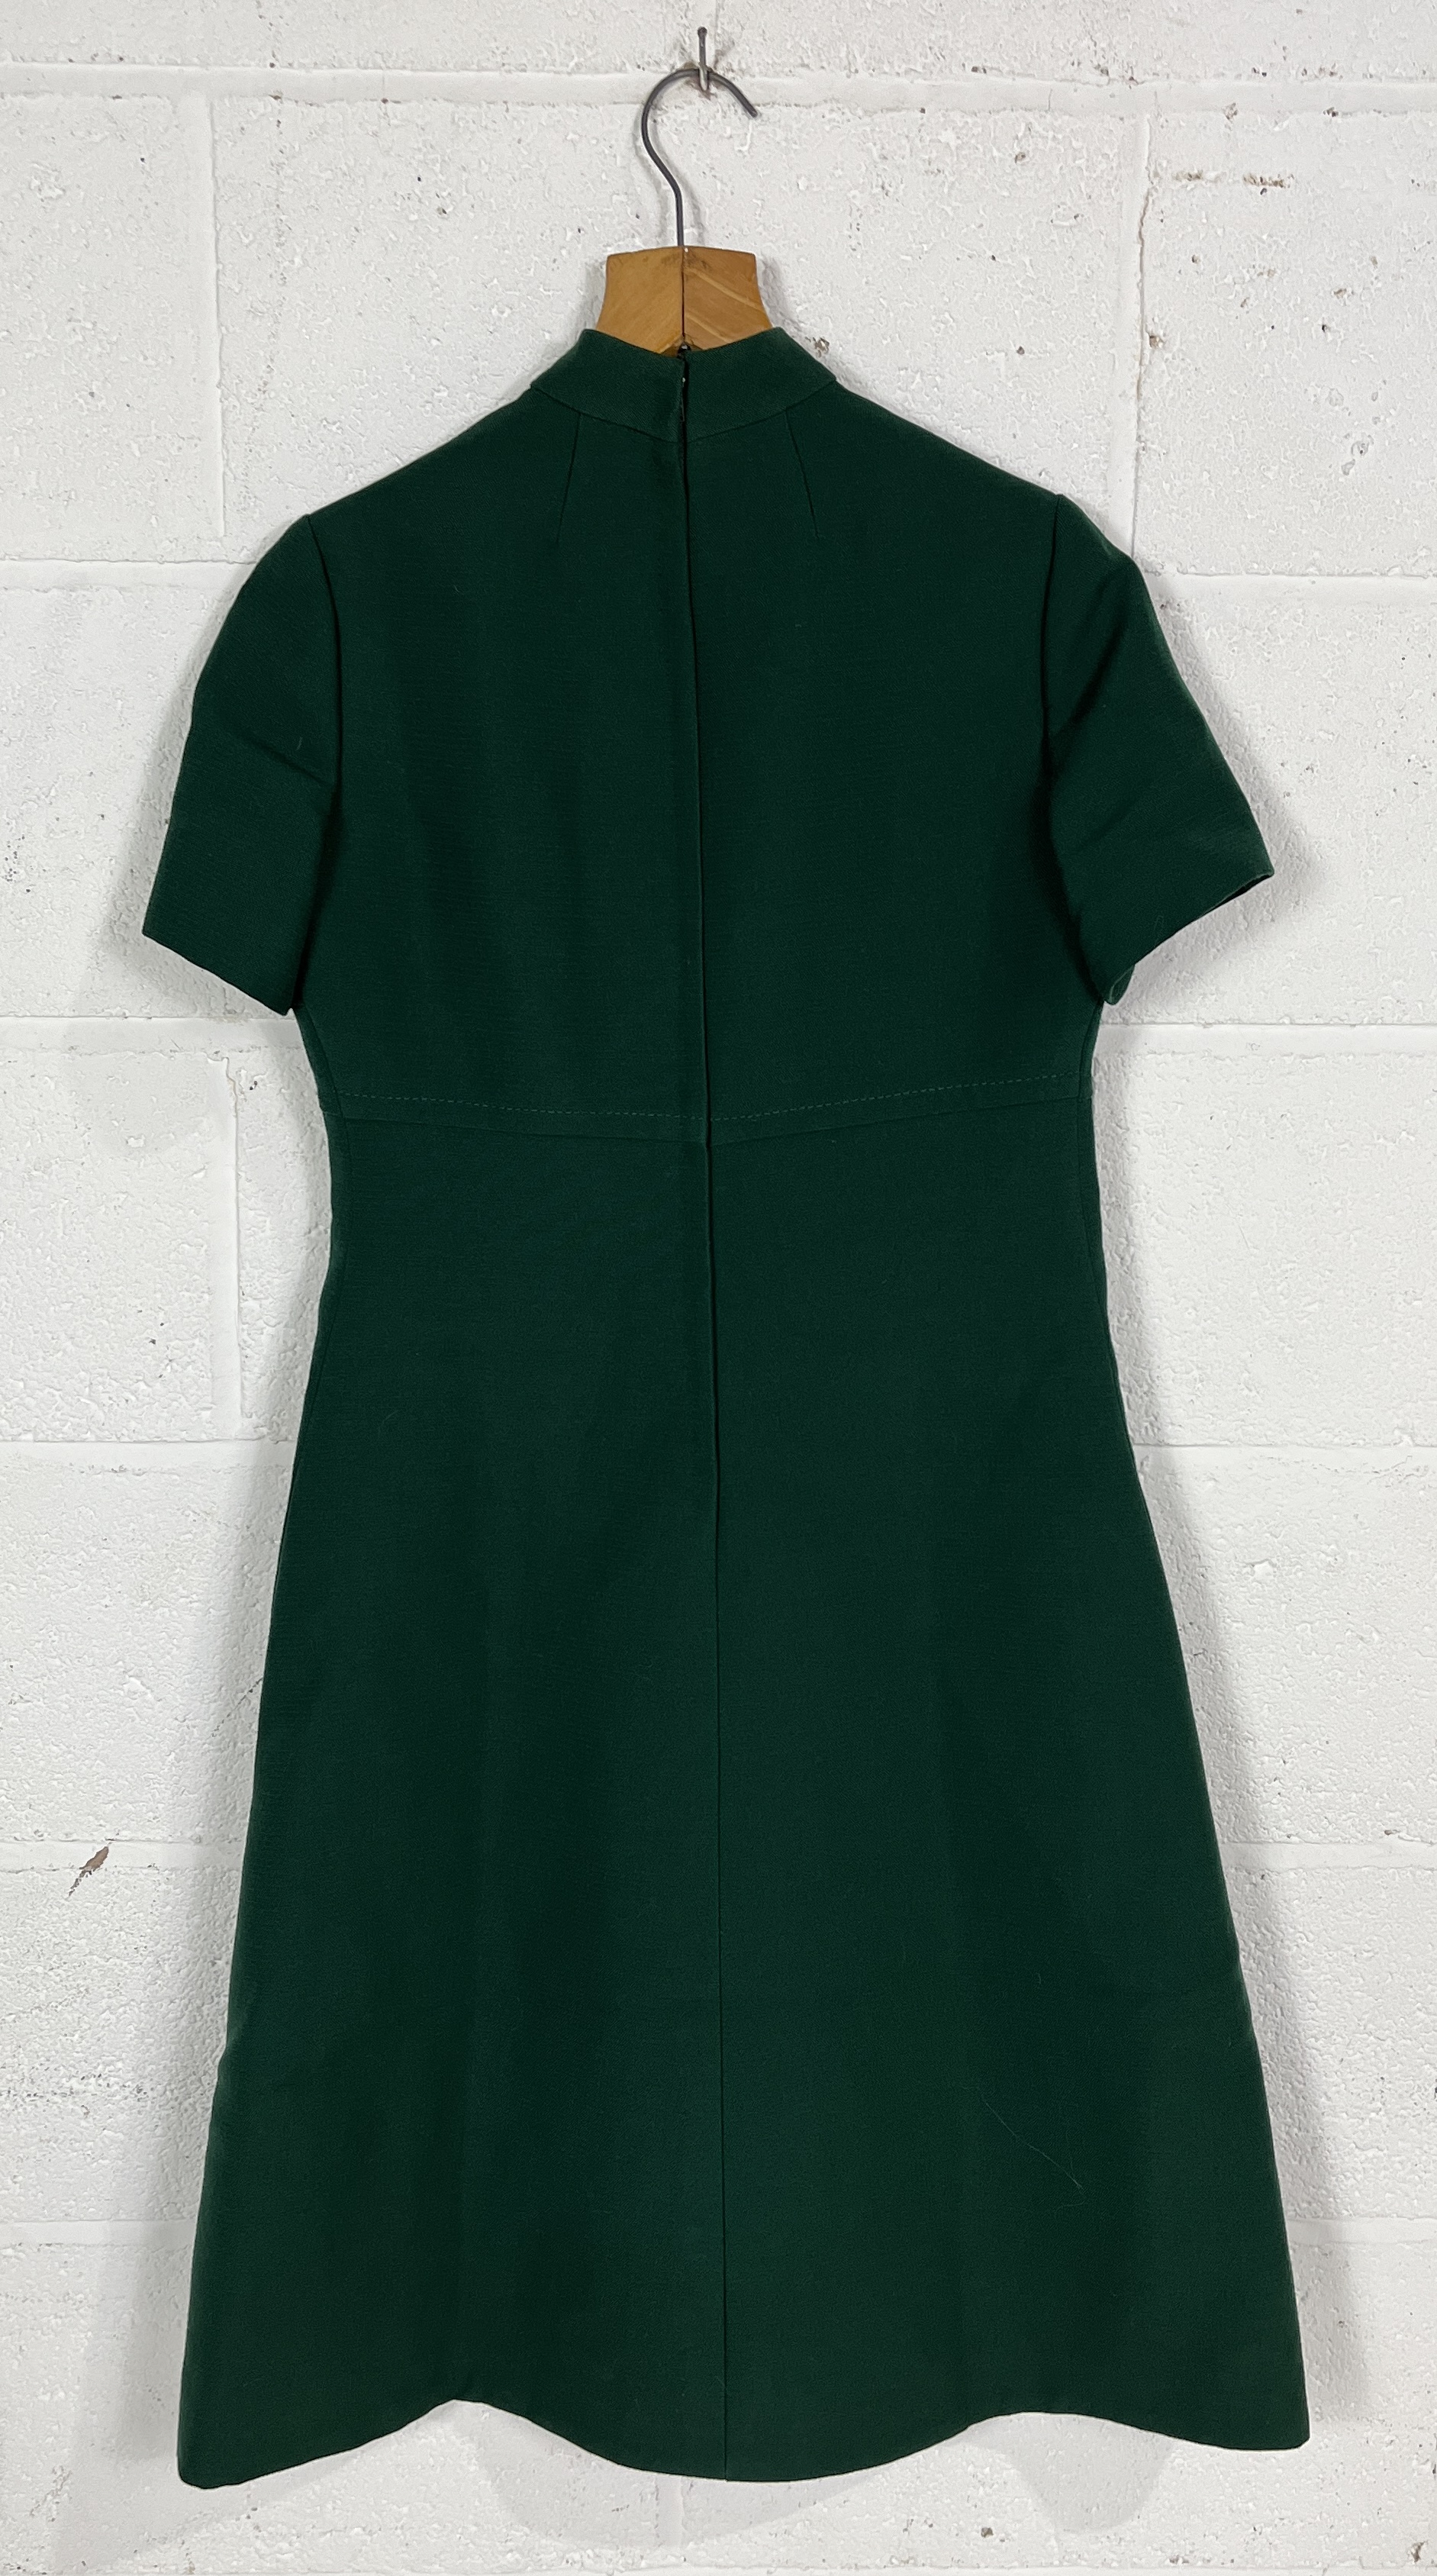 A vintage 1960's Christian Dior "Diorling" dress and jacket set, fully lined in emerald green - Image 3 of 3